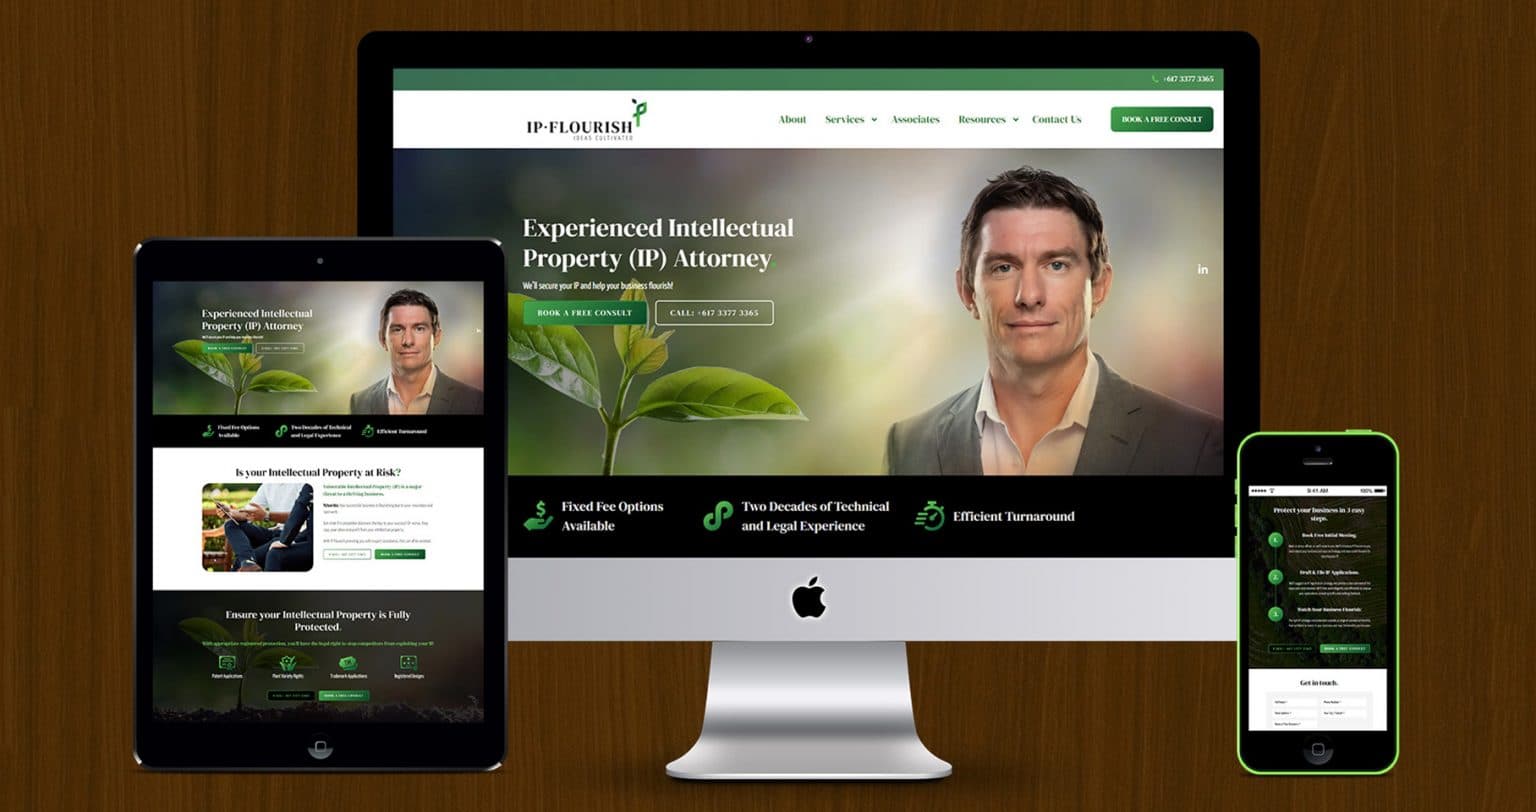 IP Flourish Business Website Design Example by Michael Sherry